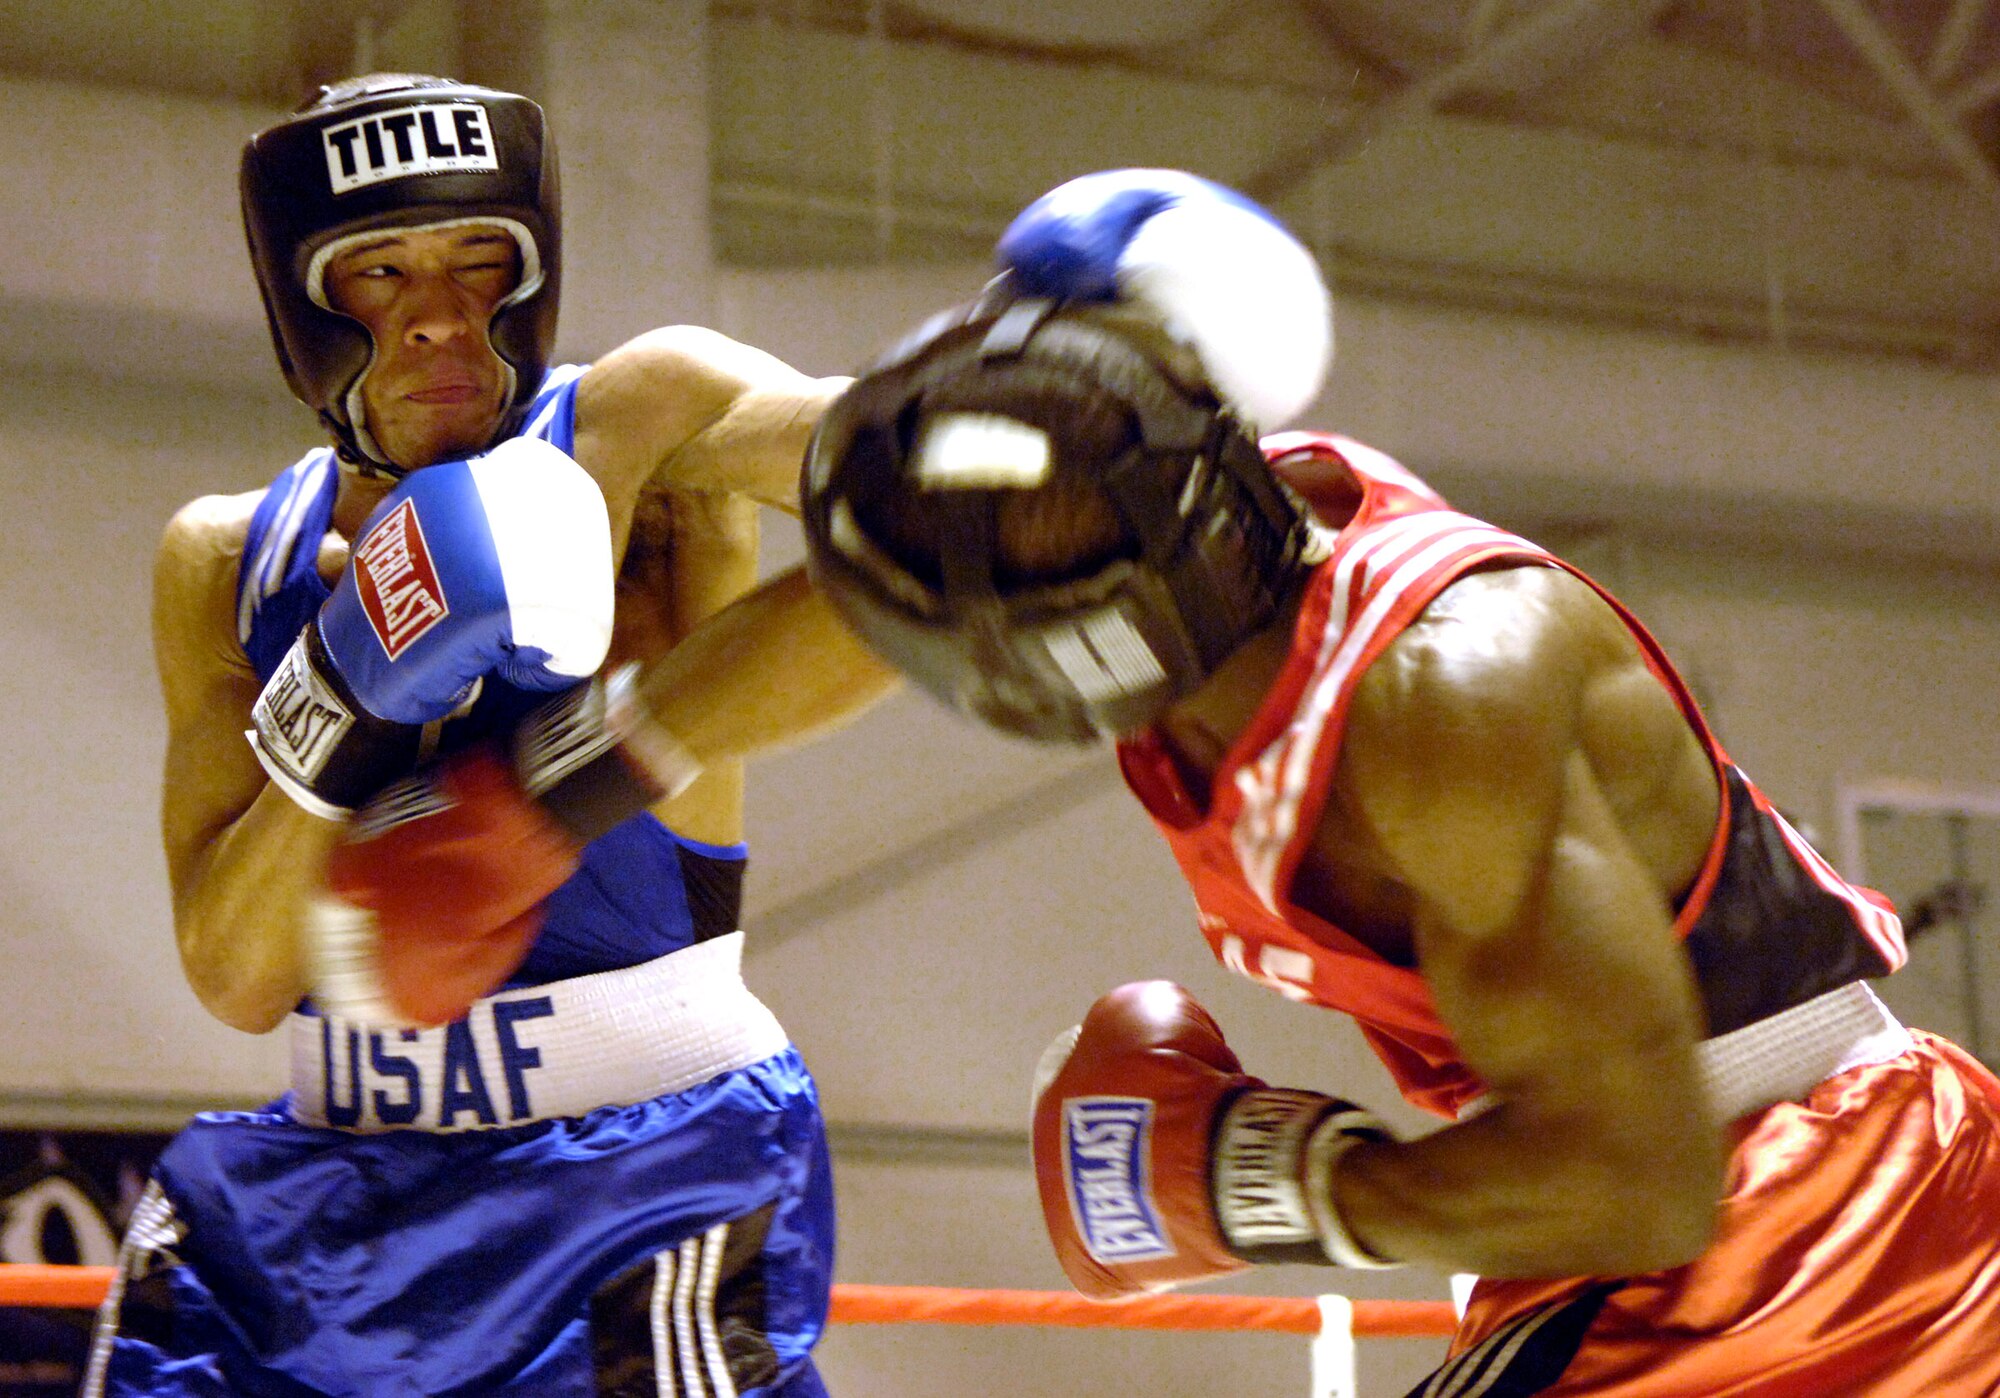 SAN ANTONIO -- Andre Penn connects with a left hook while Gary Griffin connects with a body shot during a match, Jan. 20. Penn is from Ellsworth Air Force Base, S.D., and Griffin is from Stewart Air National Guard Base, N.Y. Both will represent the Air Force at the Armed Forces Boxing Tournament, Feb. 6 - 11. (U.S. Air Force photo by Tech. Sgt. Larry A. Simmons)